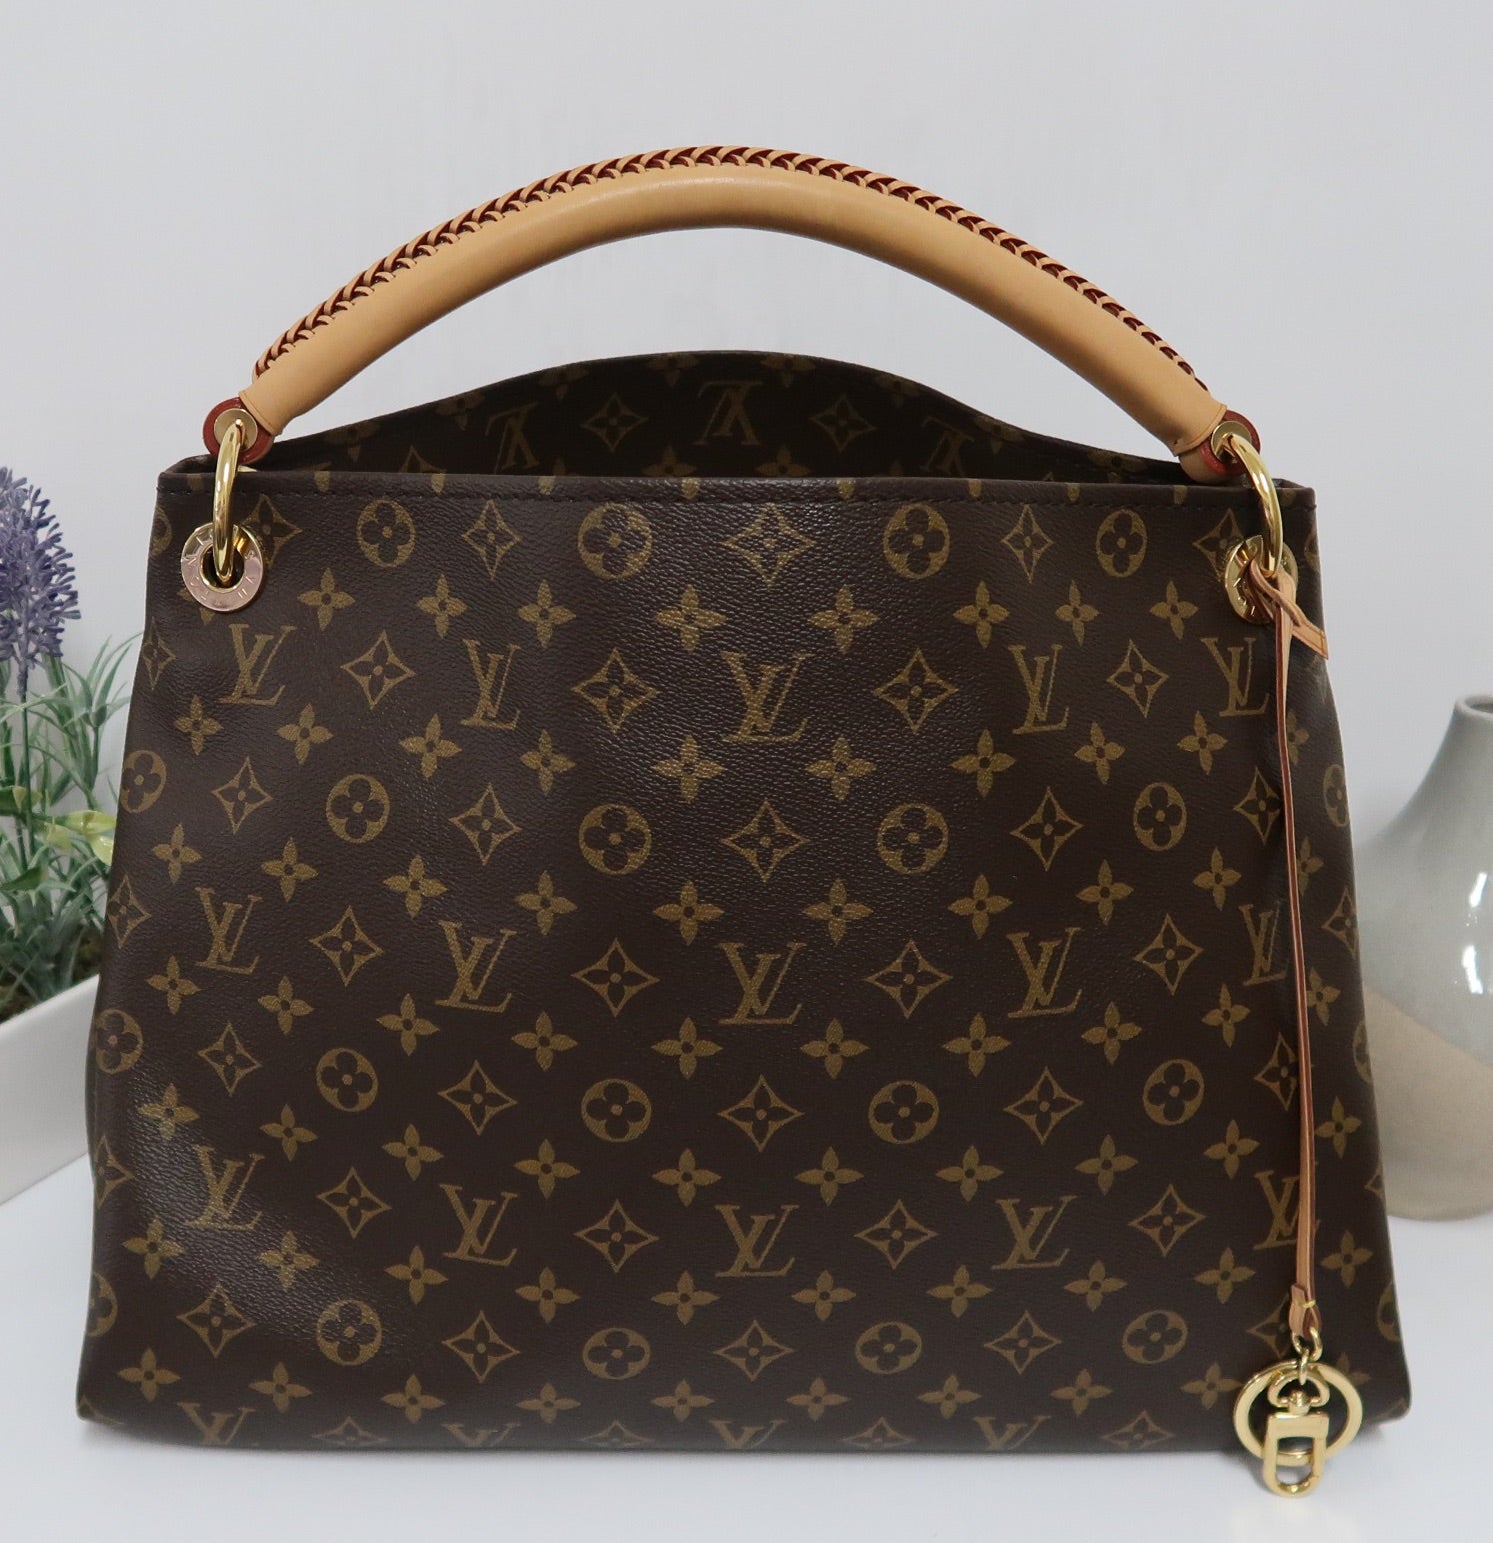 Louis Vuitton Artsy MM – The Clawset